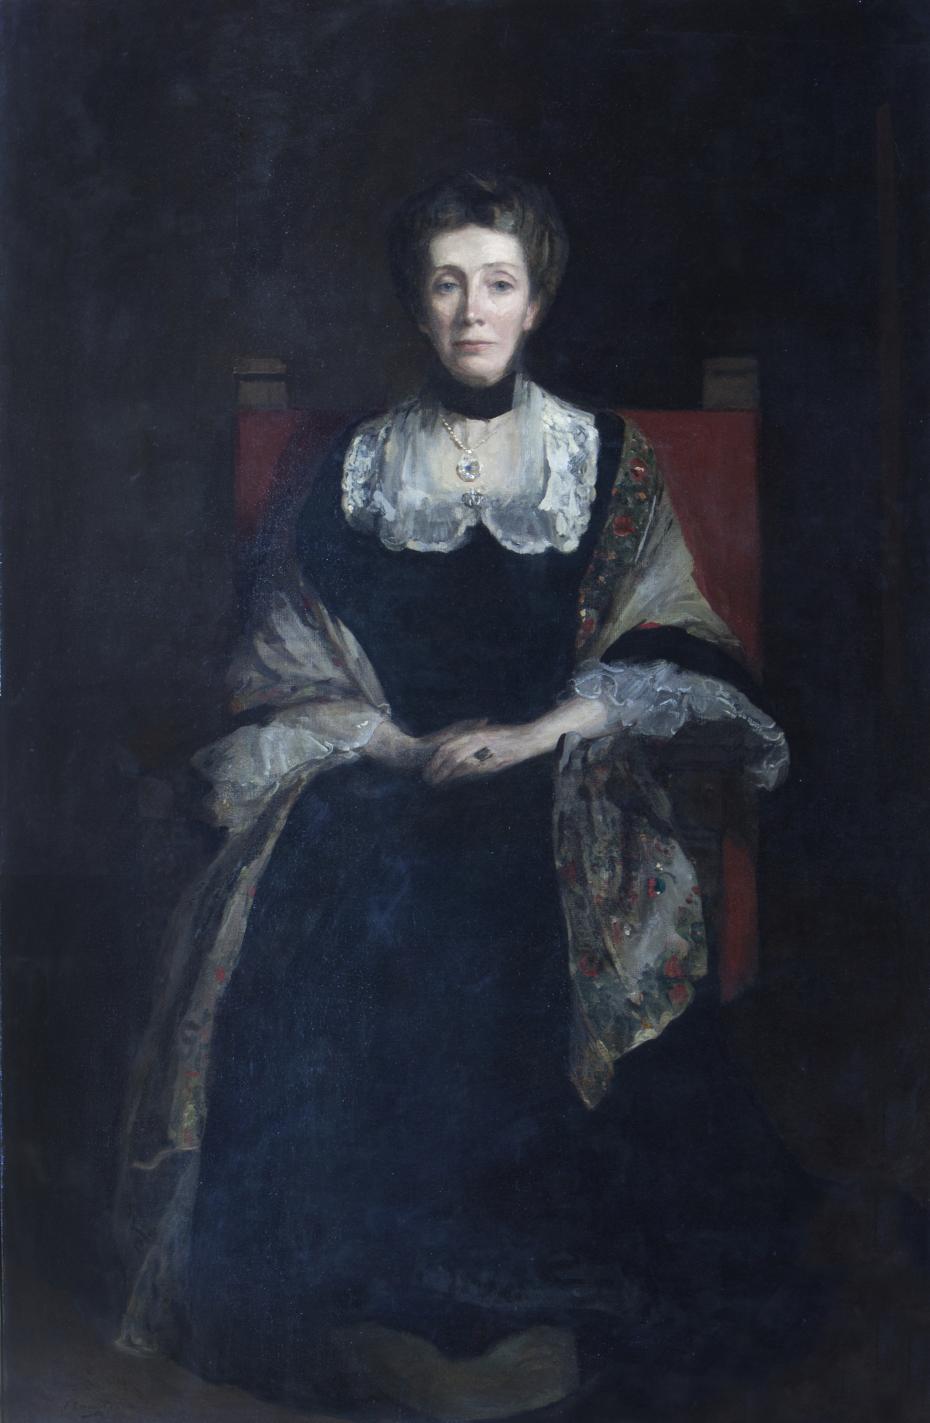 Portrait of Elizabeth Welsh by Sir John Lavery, 1904 (archive reference: GCPH 11/33/50). This portrait was displayed at the Exhibition of the International Society of Sculptors, Painters and Gravers in London, 1905, and then at the Salon of the Société Nationale des Beaux Arts in Paris, 1905, before coming to the College. It was generally admired at both exhibitions. 